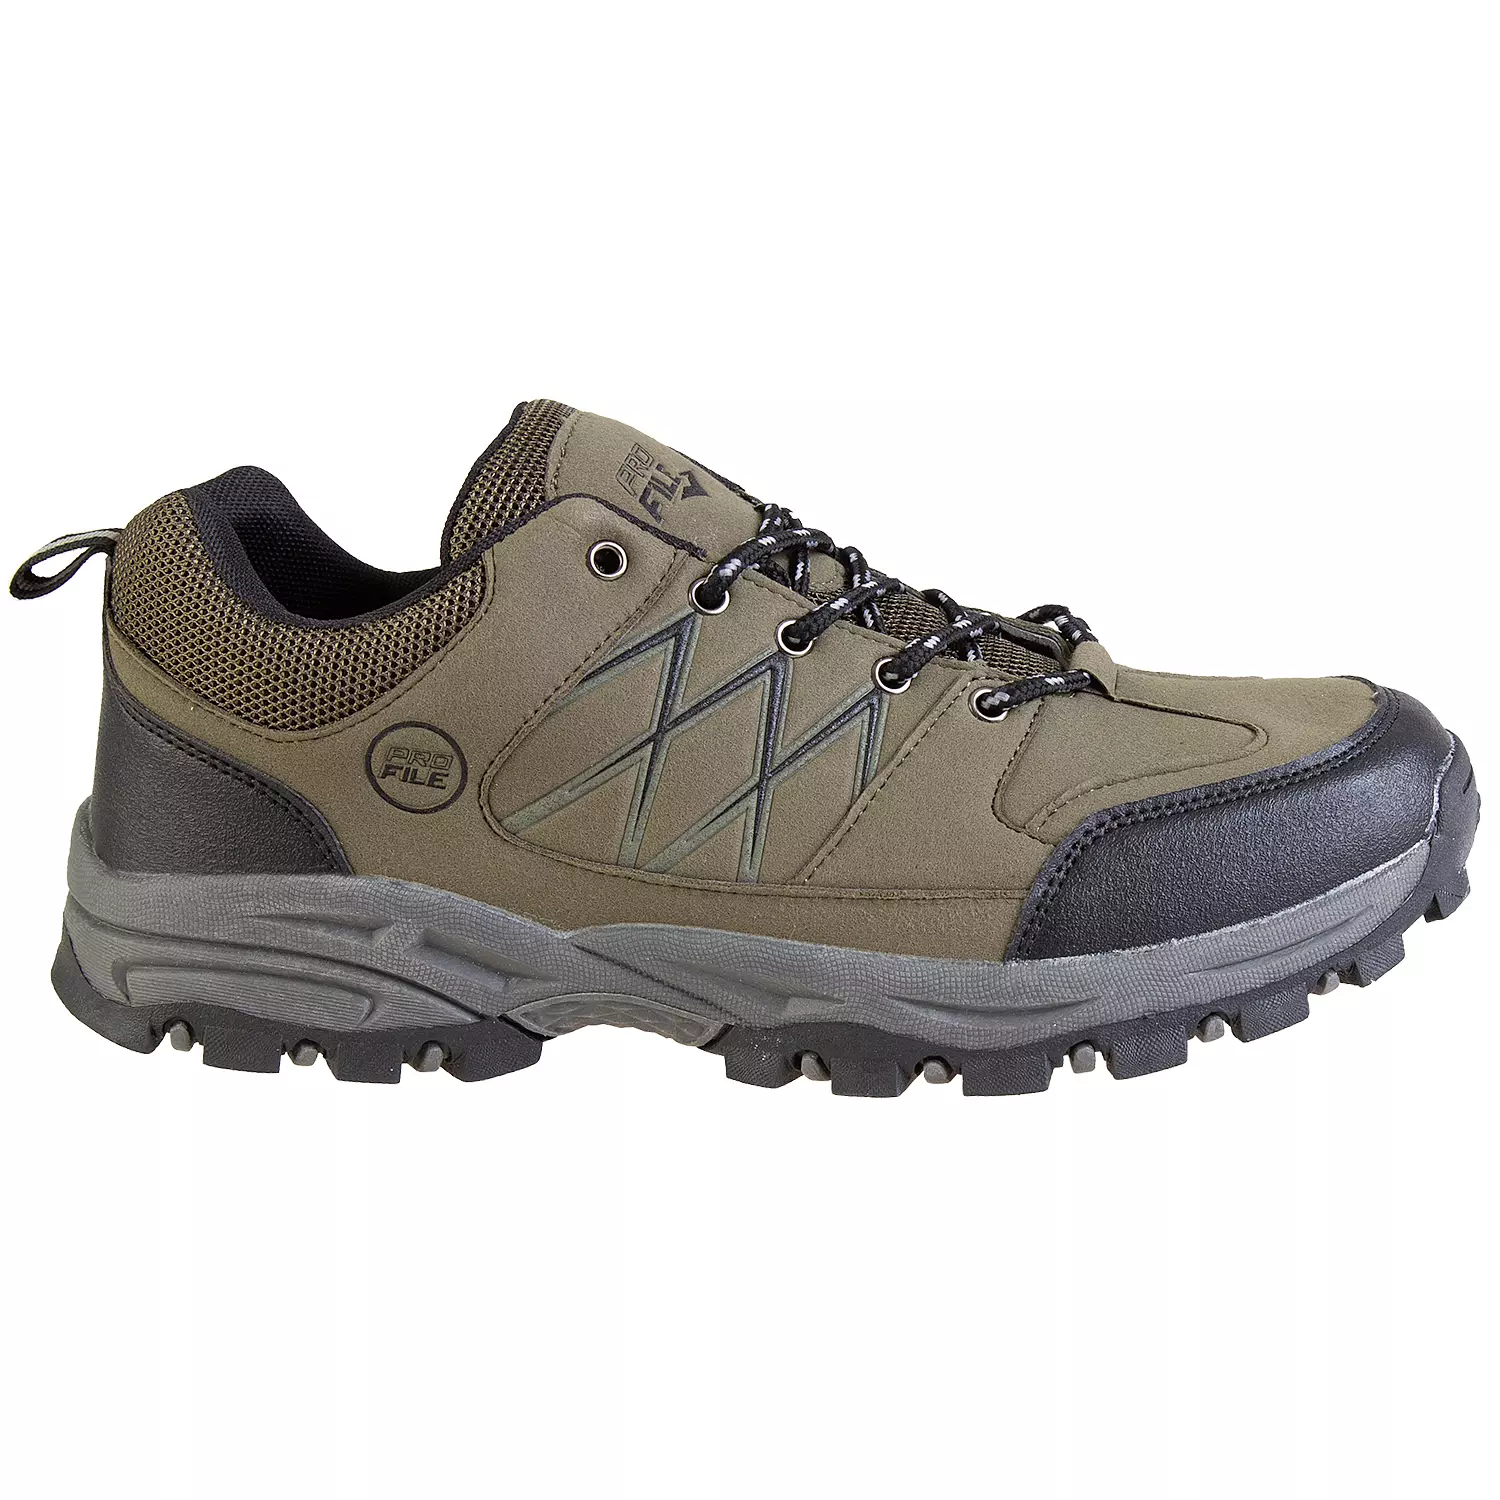 Men's low top hiking shoes with reflective strips, khaki, size 12